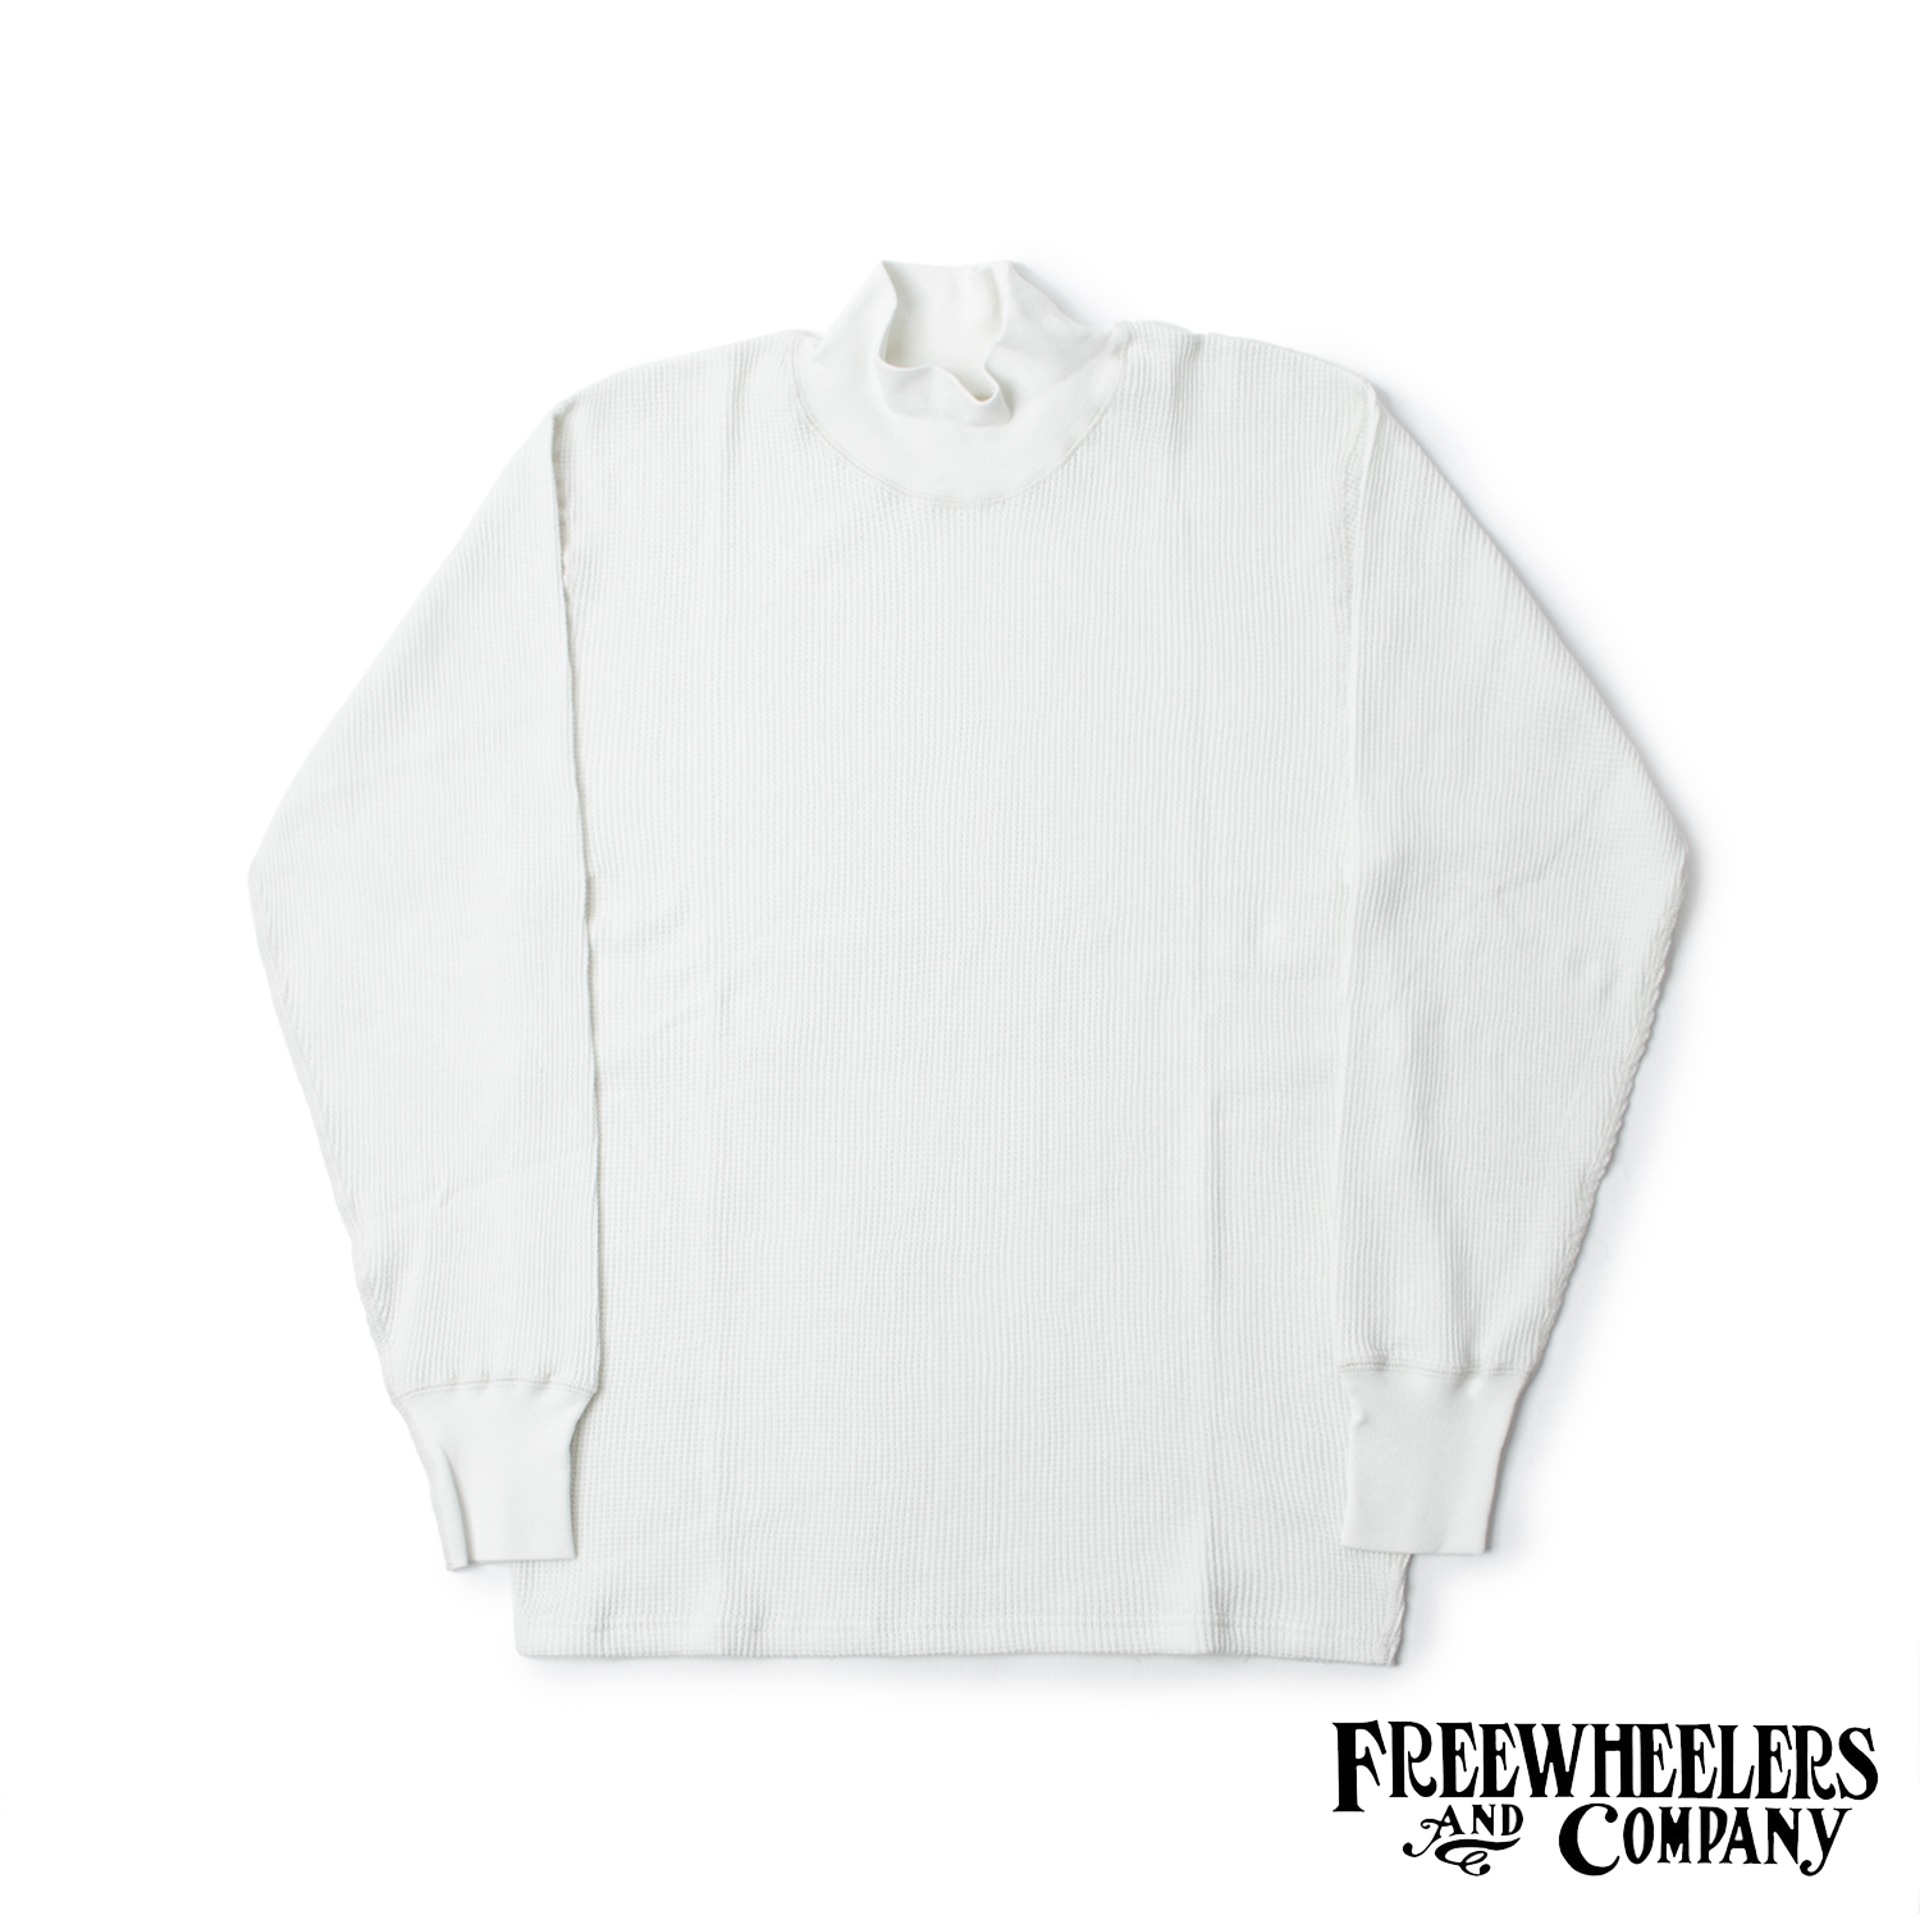 [POWER WEAR]1950s STYLE UNDERWEAR“HIGH NECKED THERMAL”LONG SLEEVE SHIRT (Ivory)